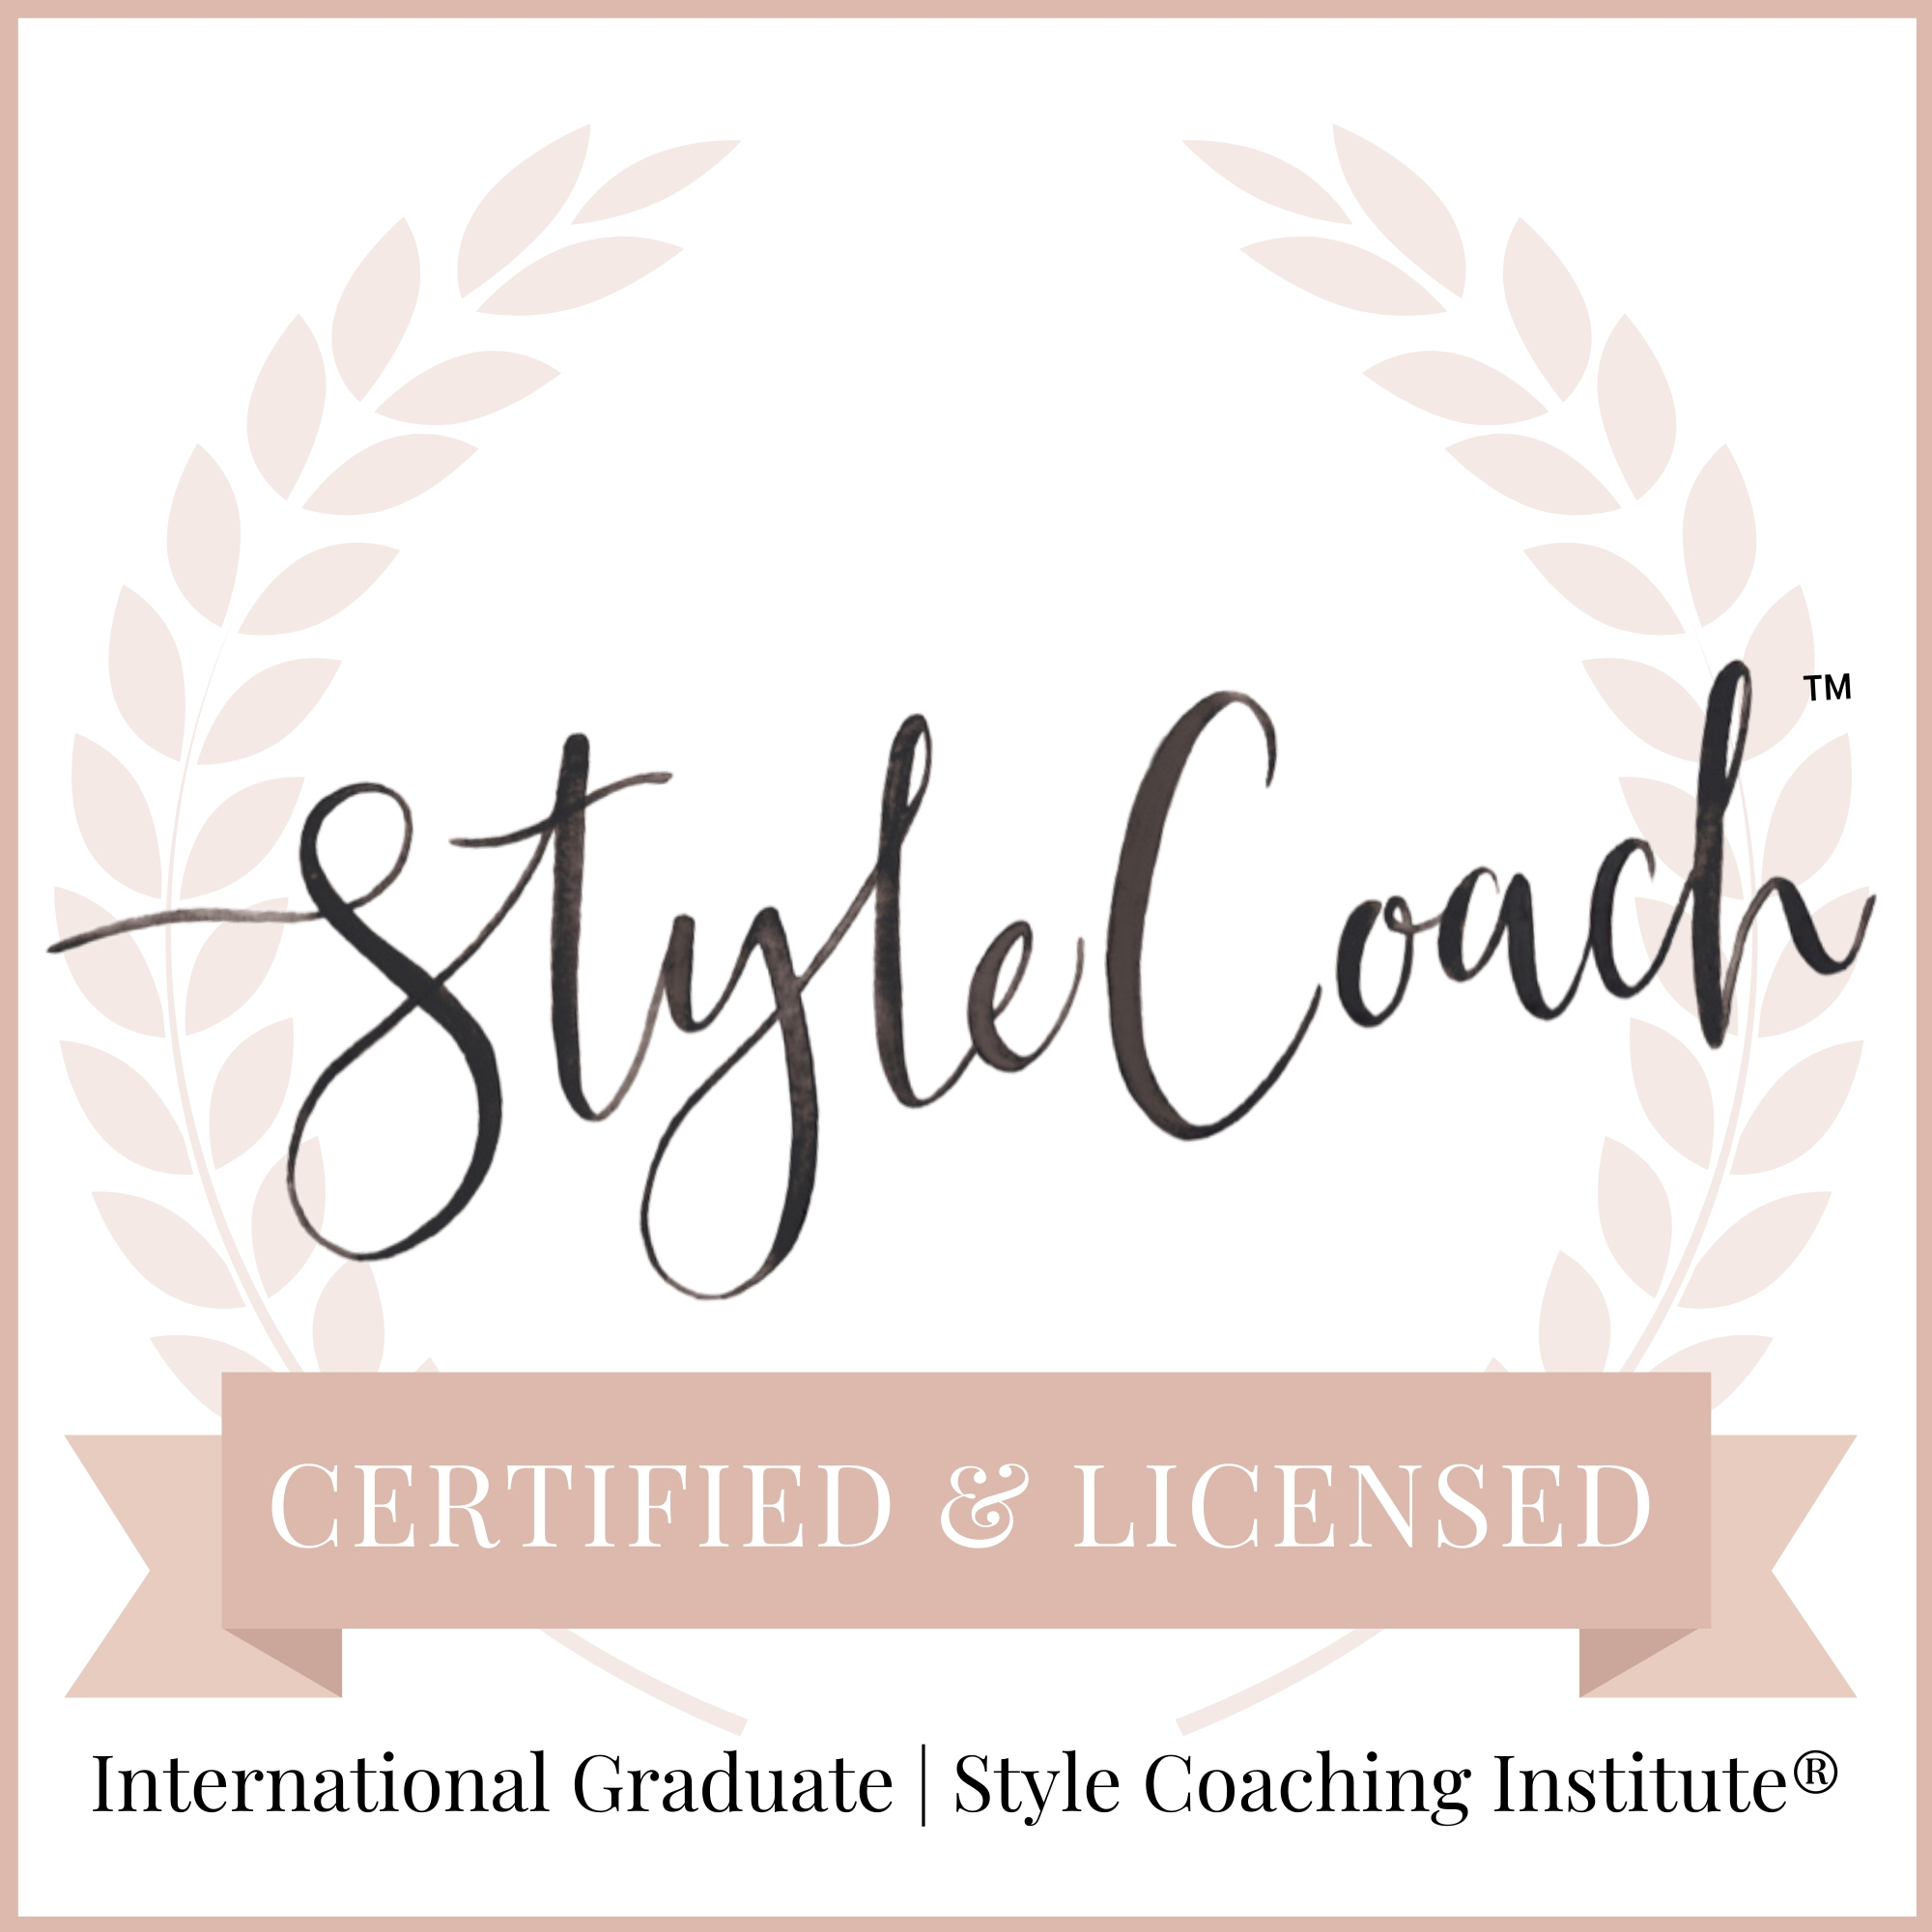 Style Coach certified and licensed